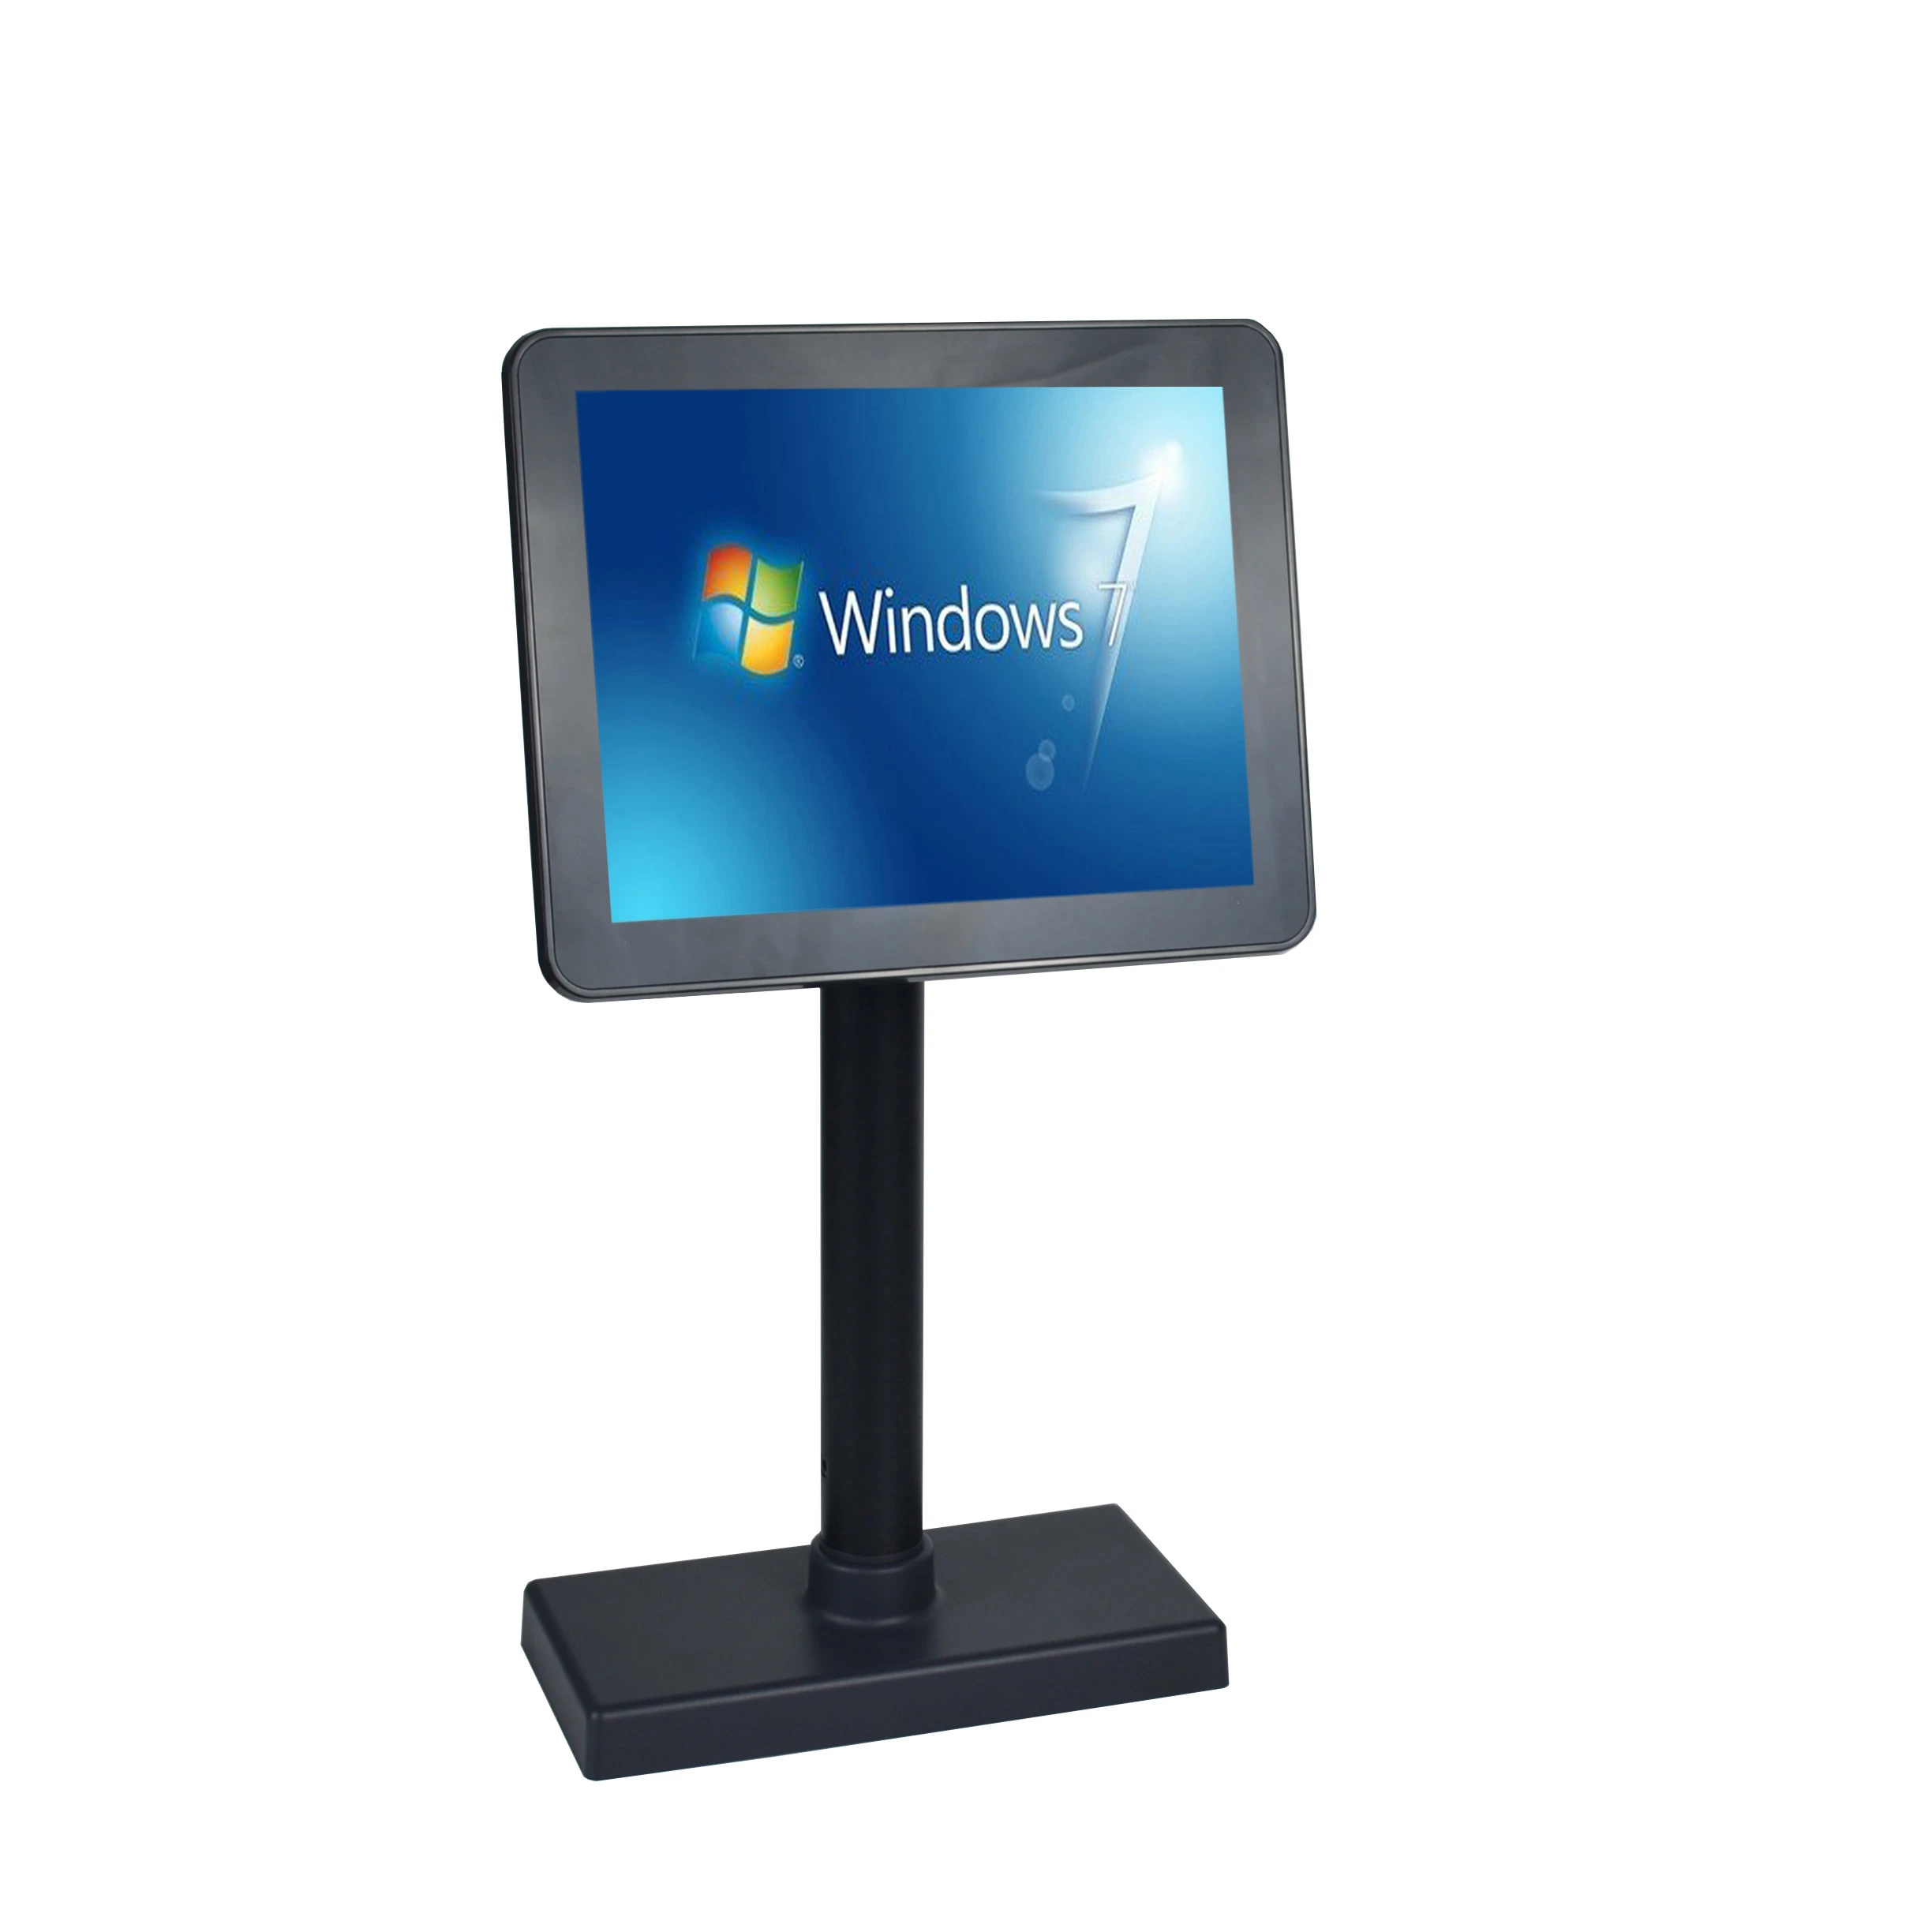 

Guangzhou Zihhua pos system 9.7 inch VGA point of sale display tft lcd monitor 1024*768, Black